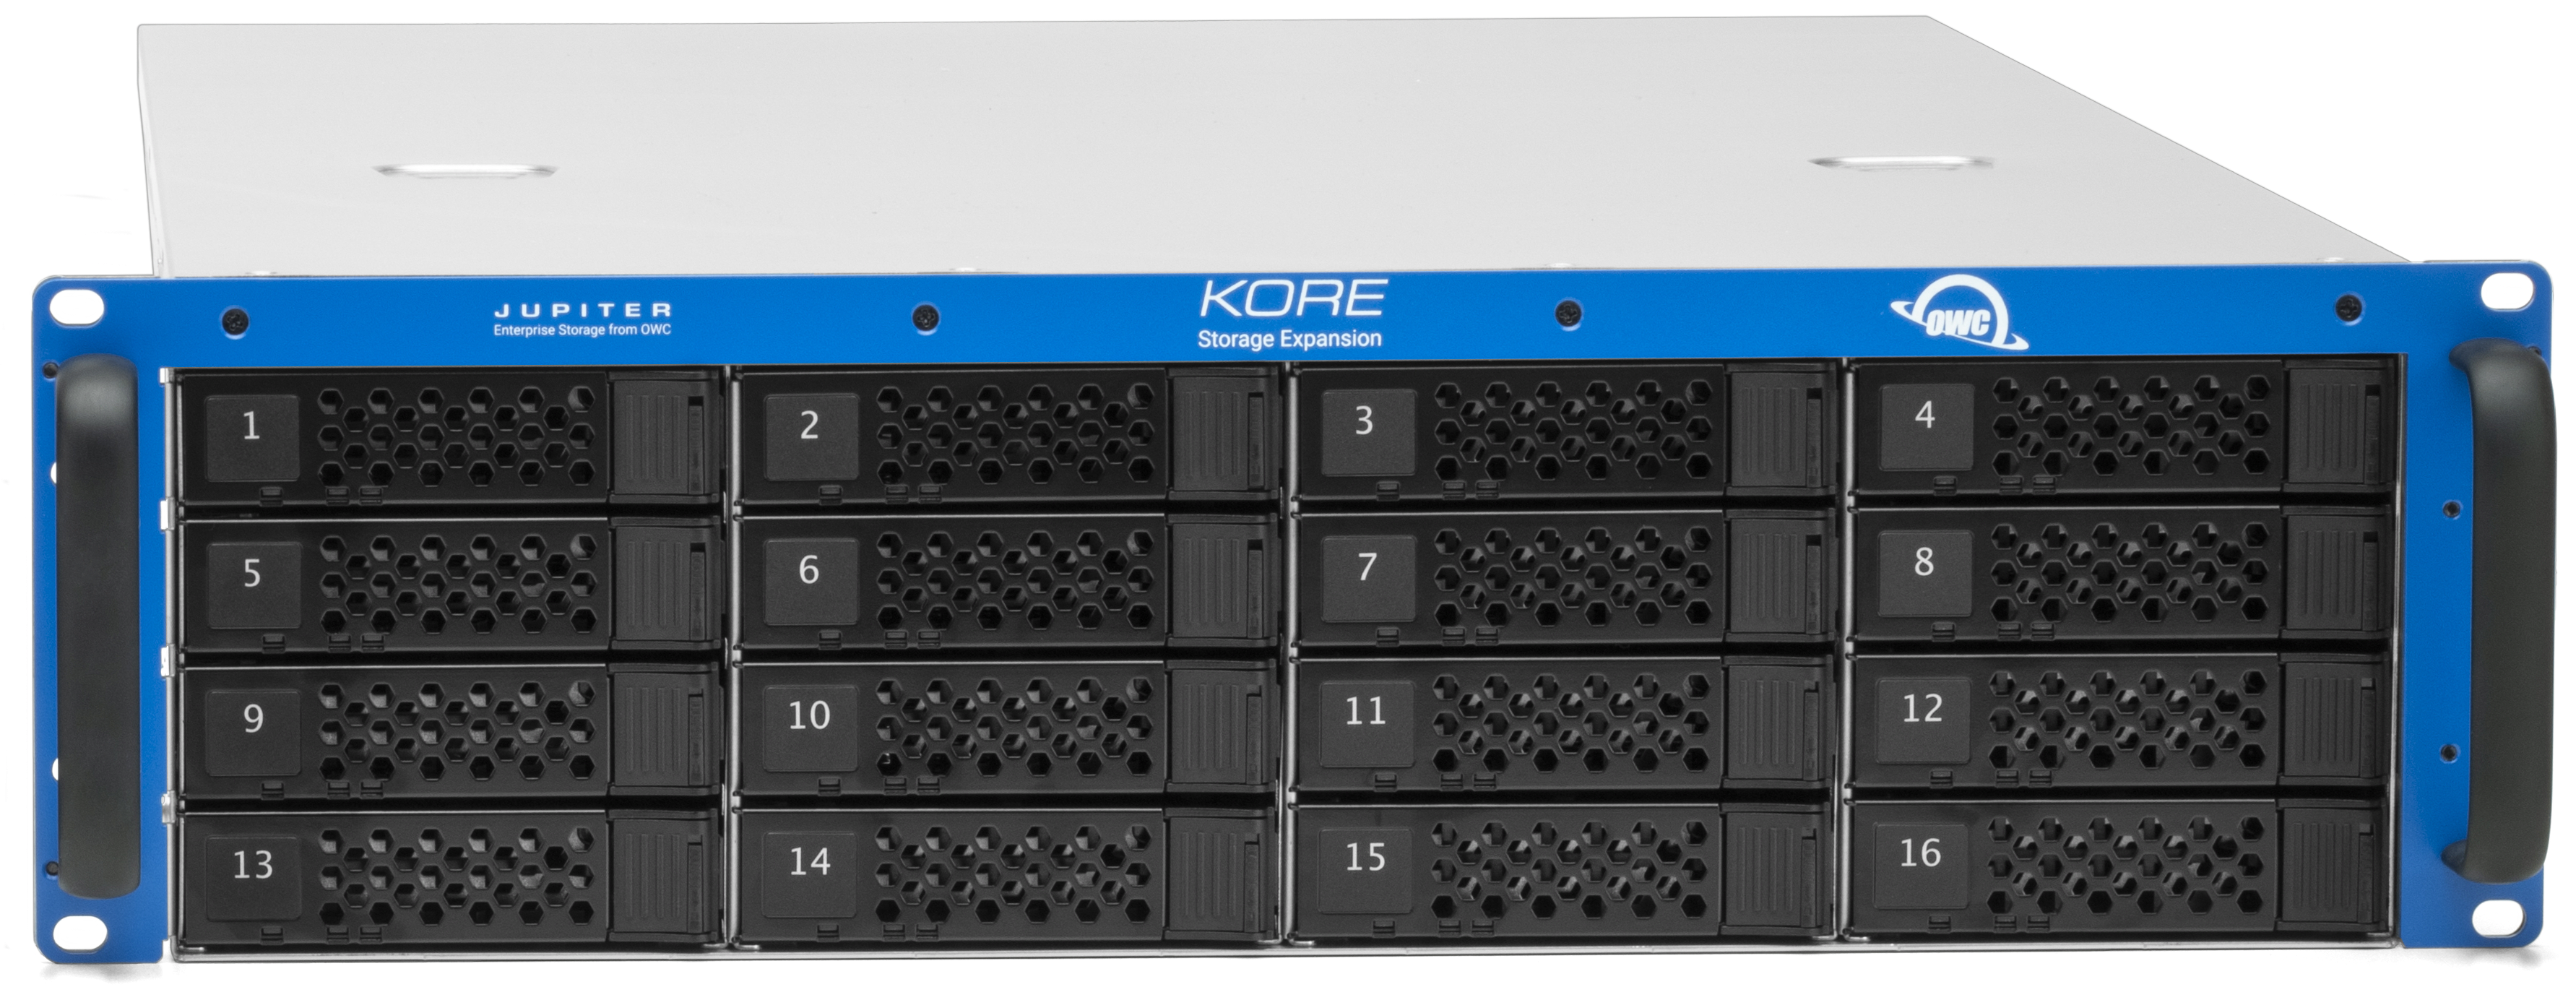 OWC Jupiter Kore with 16 Drives